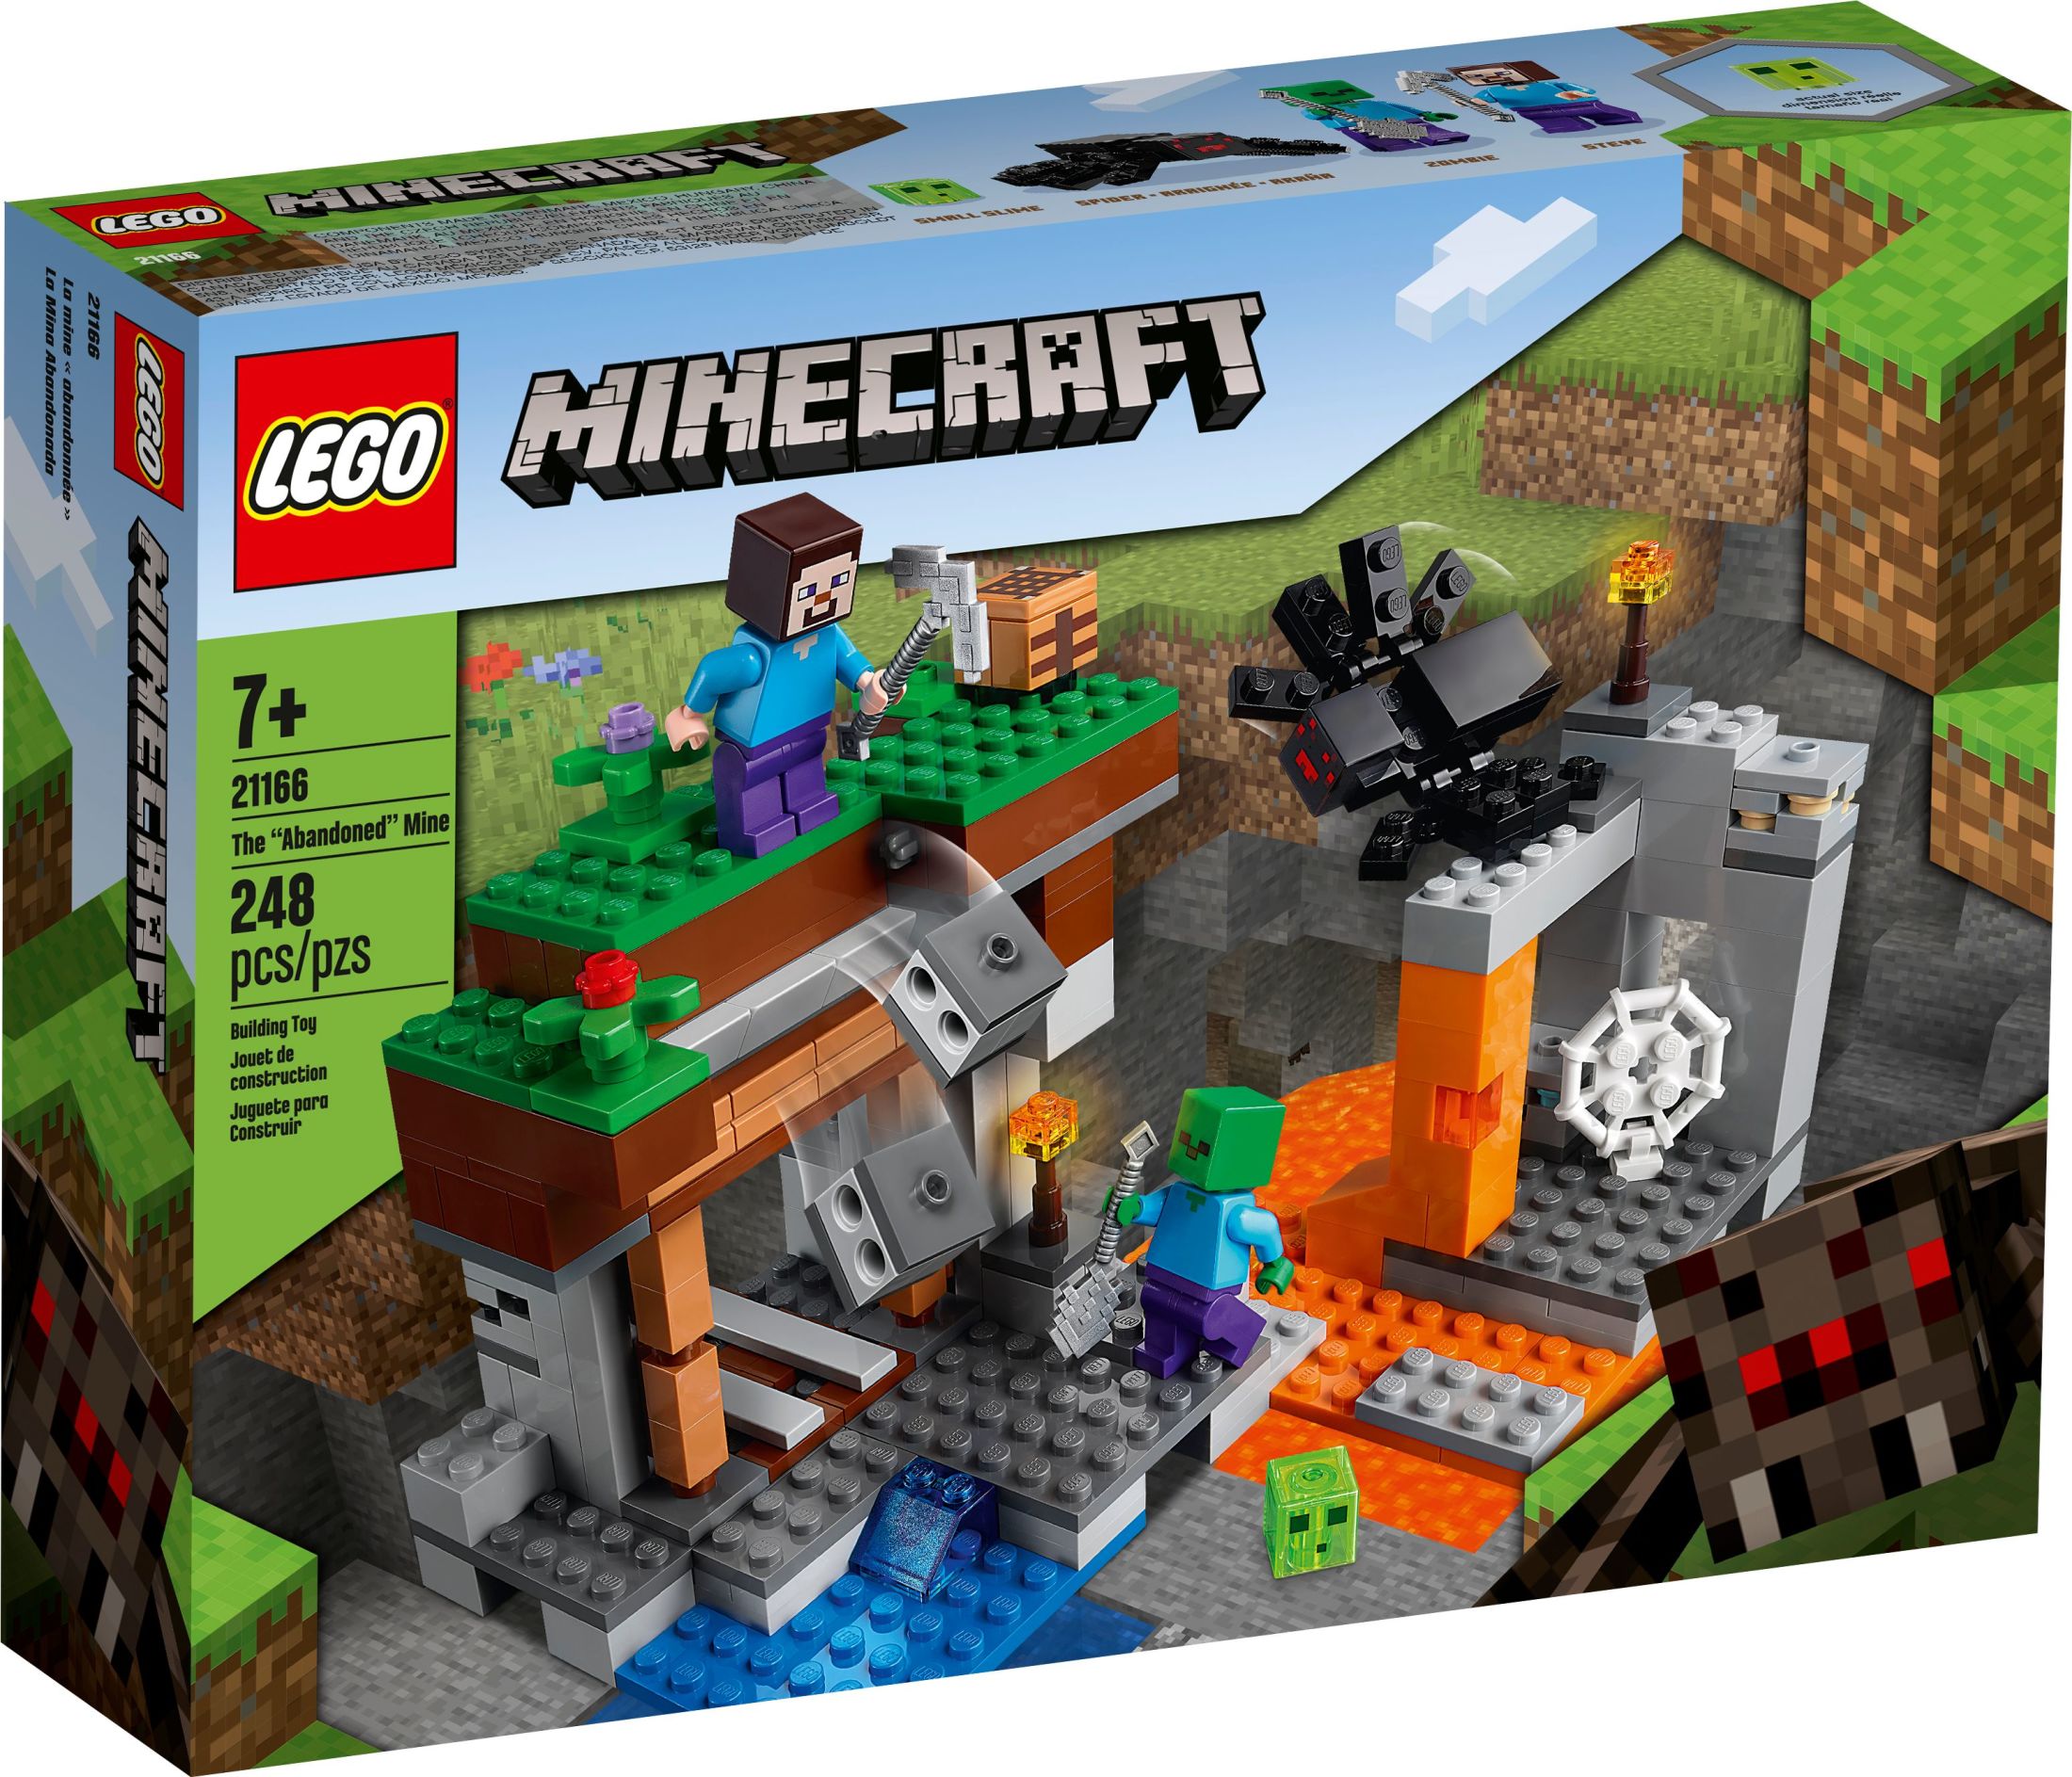 LEGO Minecraft The Abandoned Mine Building Toy, 21166 Zombie Cave with Slime, Steve & Spider Figures, Gift idea for Kids, Boys and Girls Age 7 plus - image 3 of 8